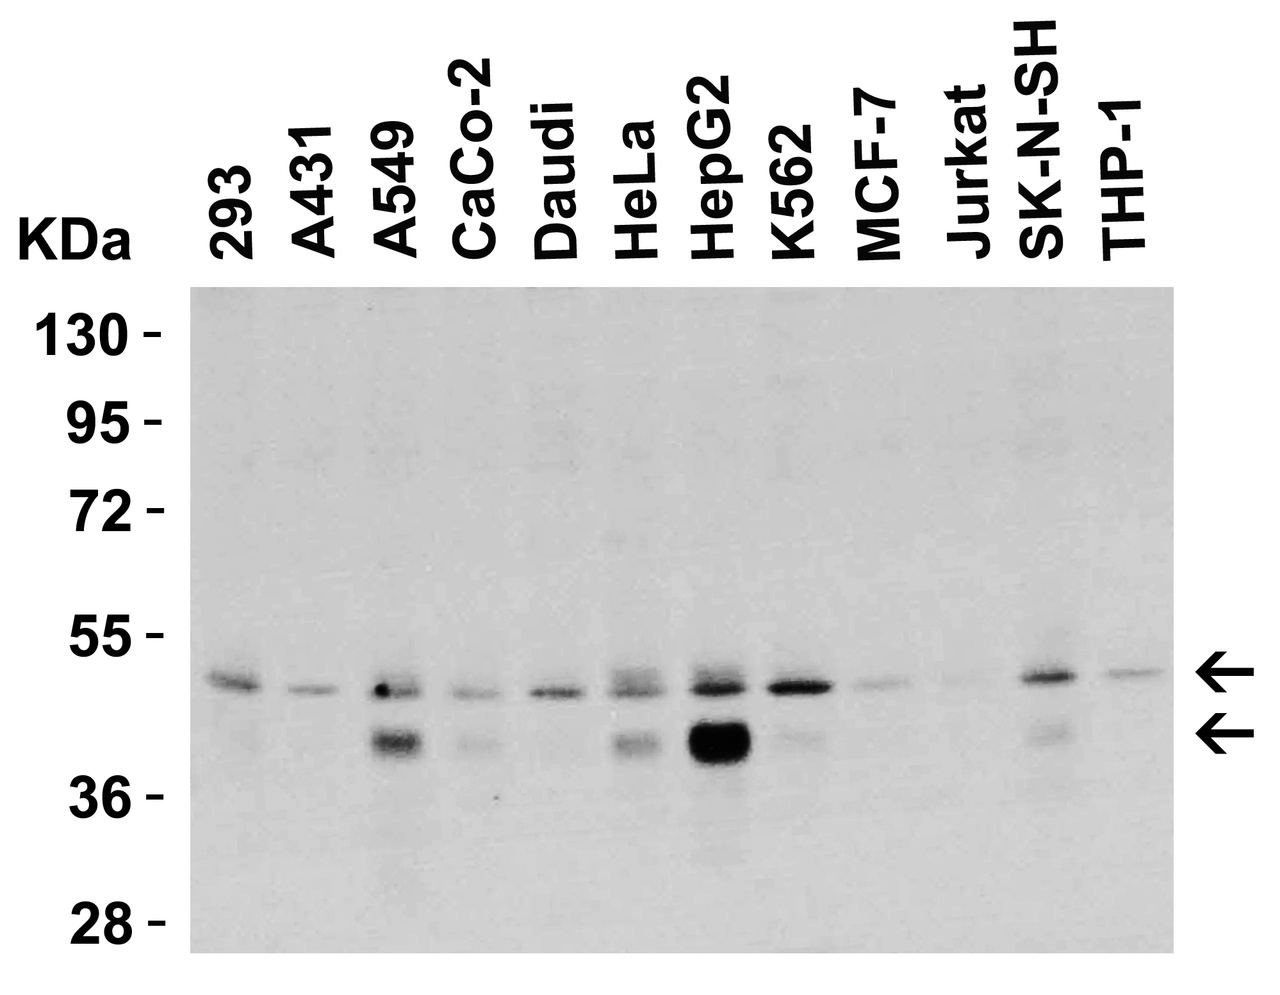 Figure 1 Western Blot Validation in Human Cell Lines
Loading: 15 &#956;g of lysates per lane.
Antibodies: DR5 2019, (0.5 &#956;g/mL) , 1h incubation at RT in 5% NFDM/TBST.
Secondary: Goat anti-rabbit IgG HRP conjugate at 1:10000 dilution.